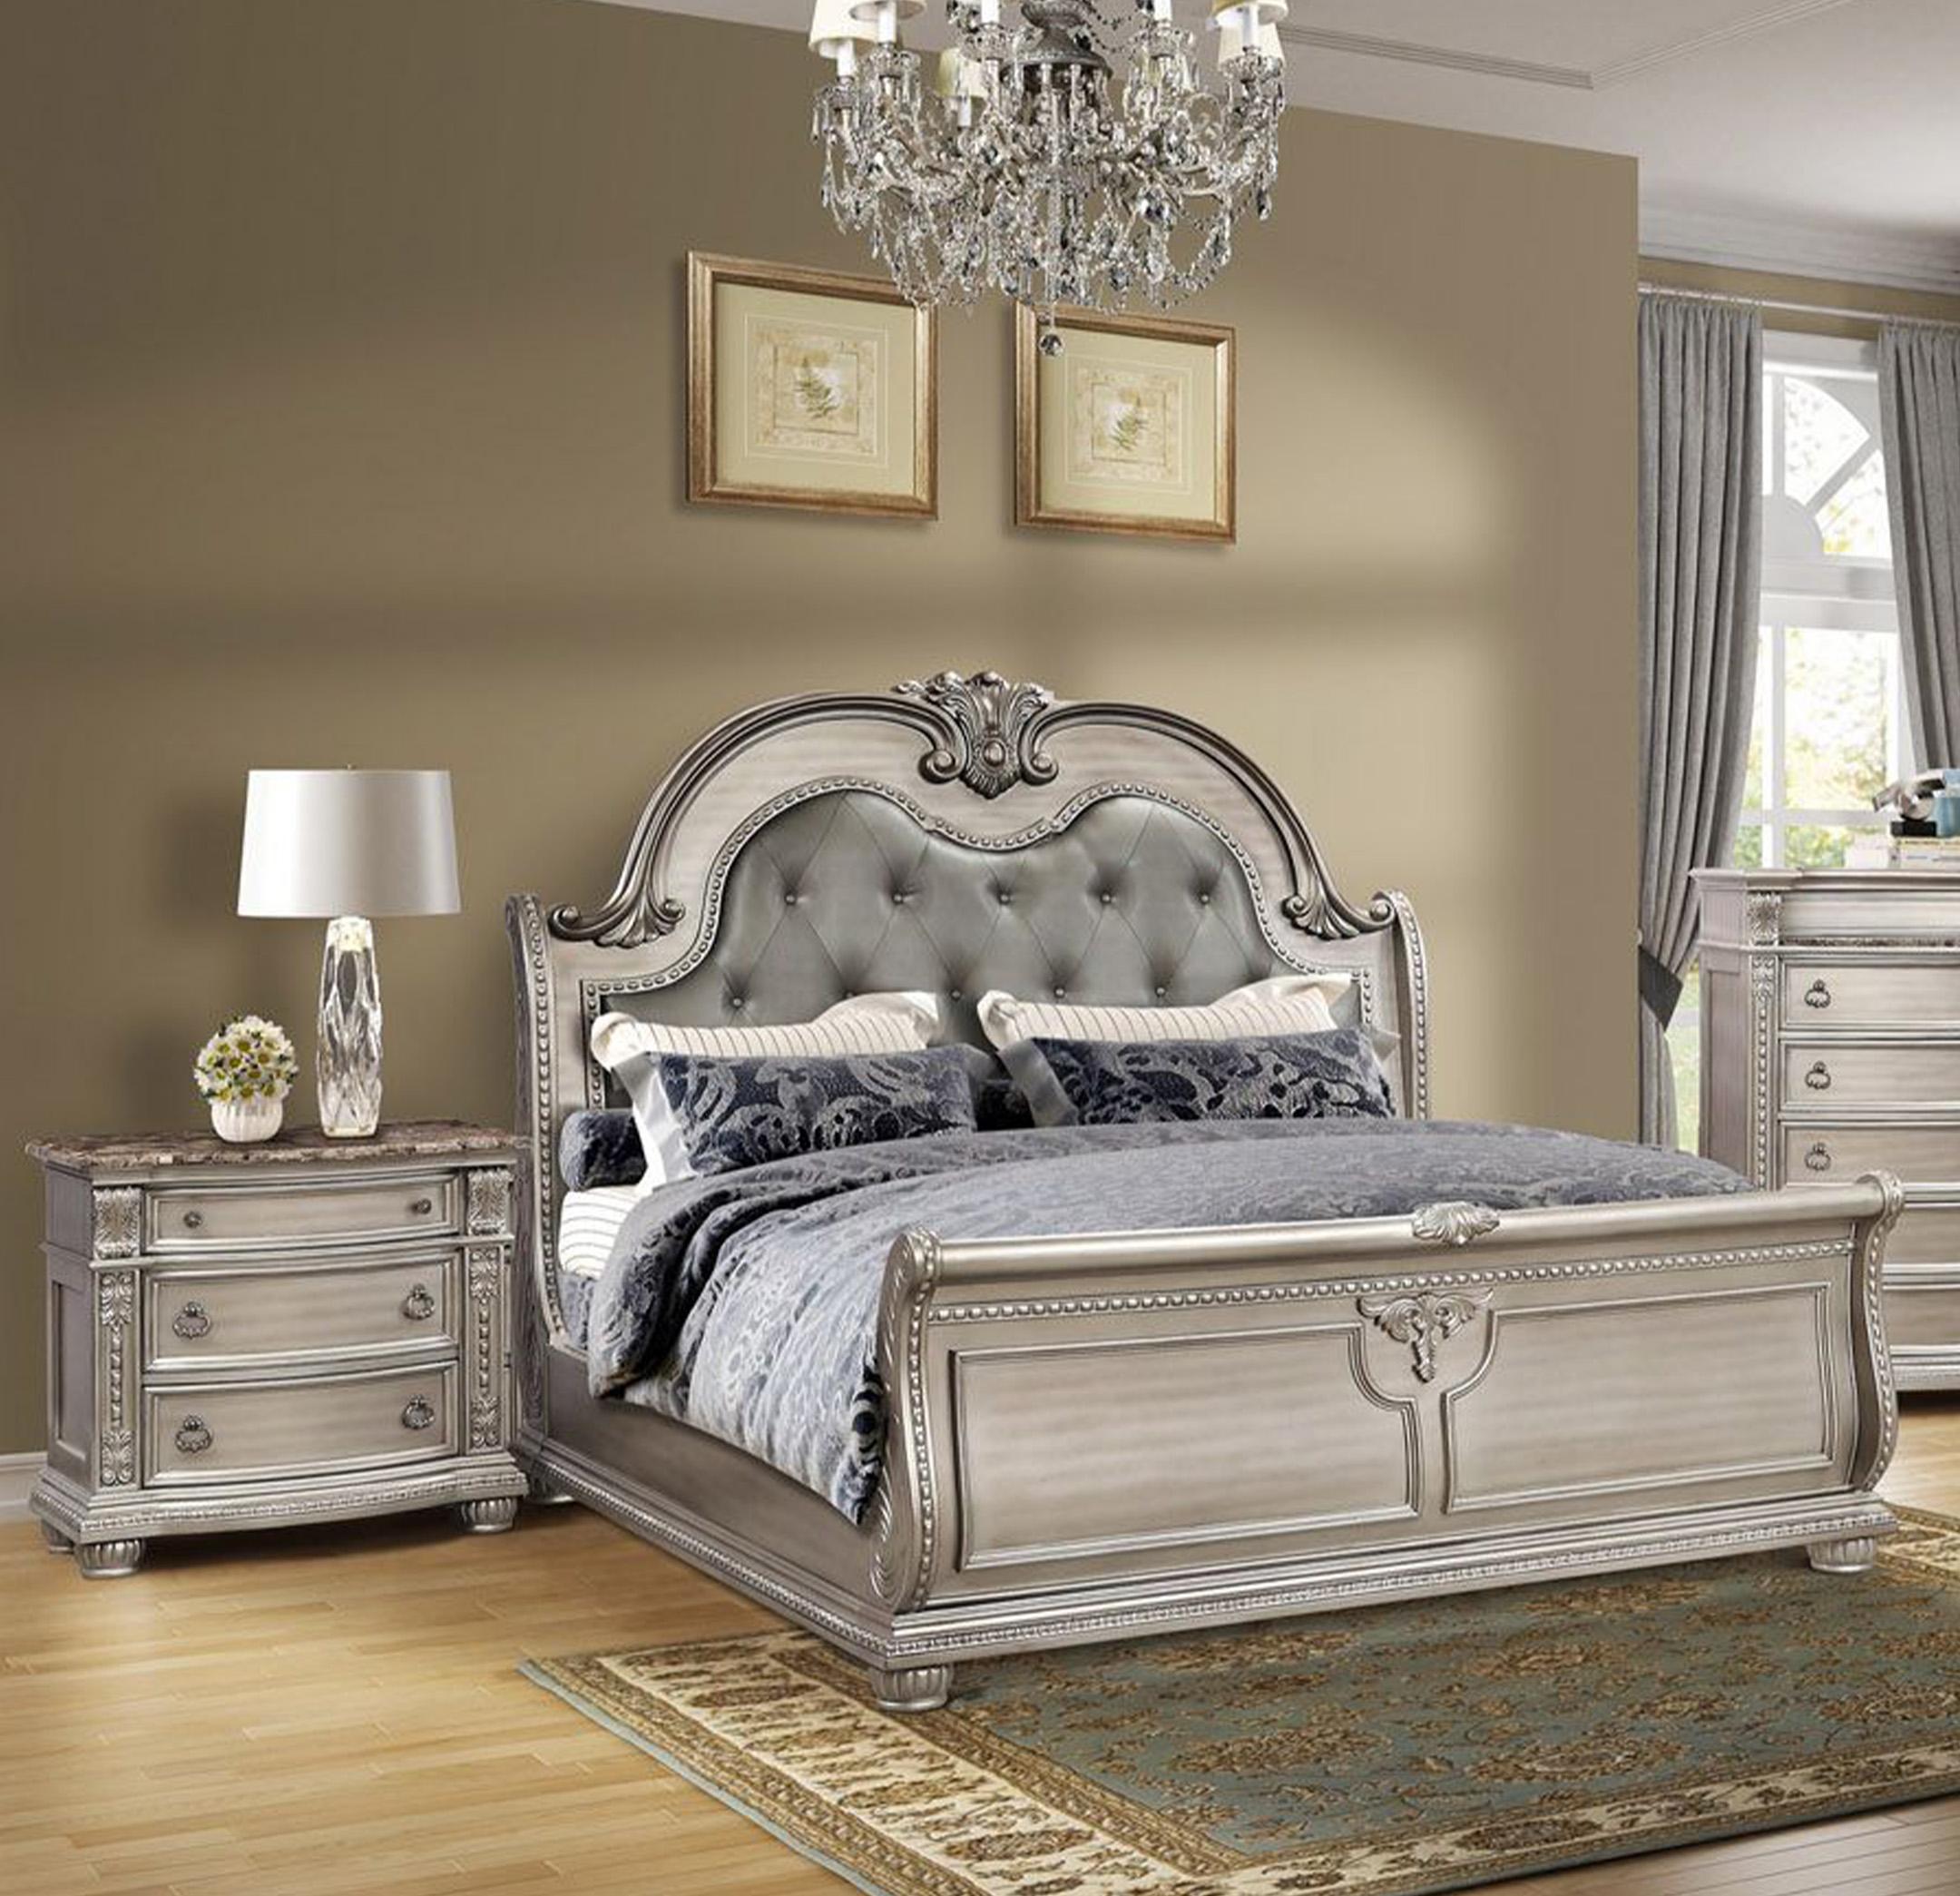 Classic, Traditional Sleigh Bedroom Set B9506 B9506-CK-2N-3PC in Platinum Bonded Leather